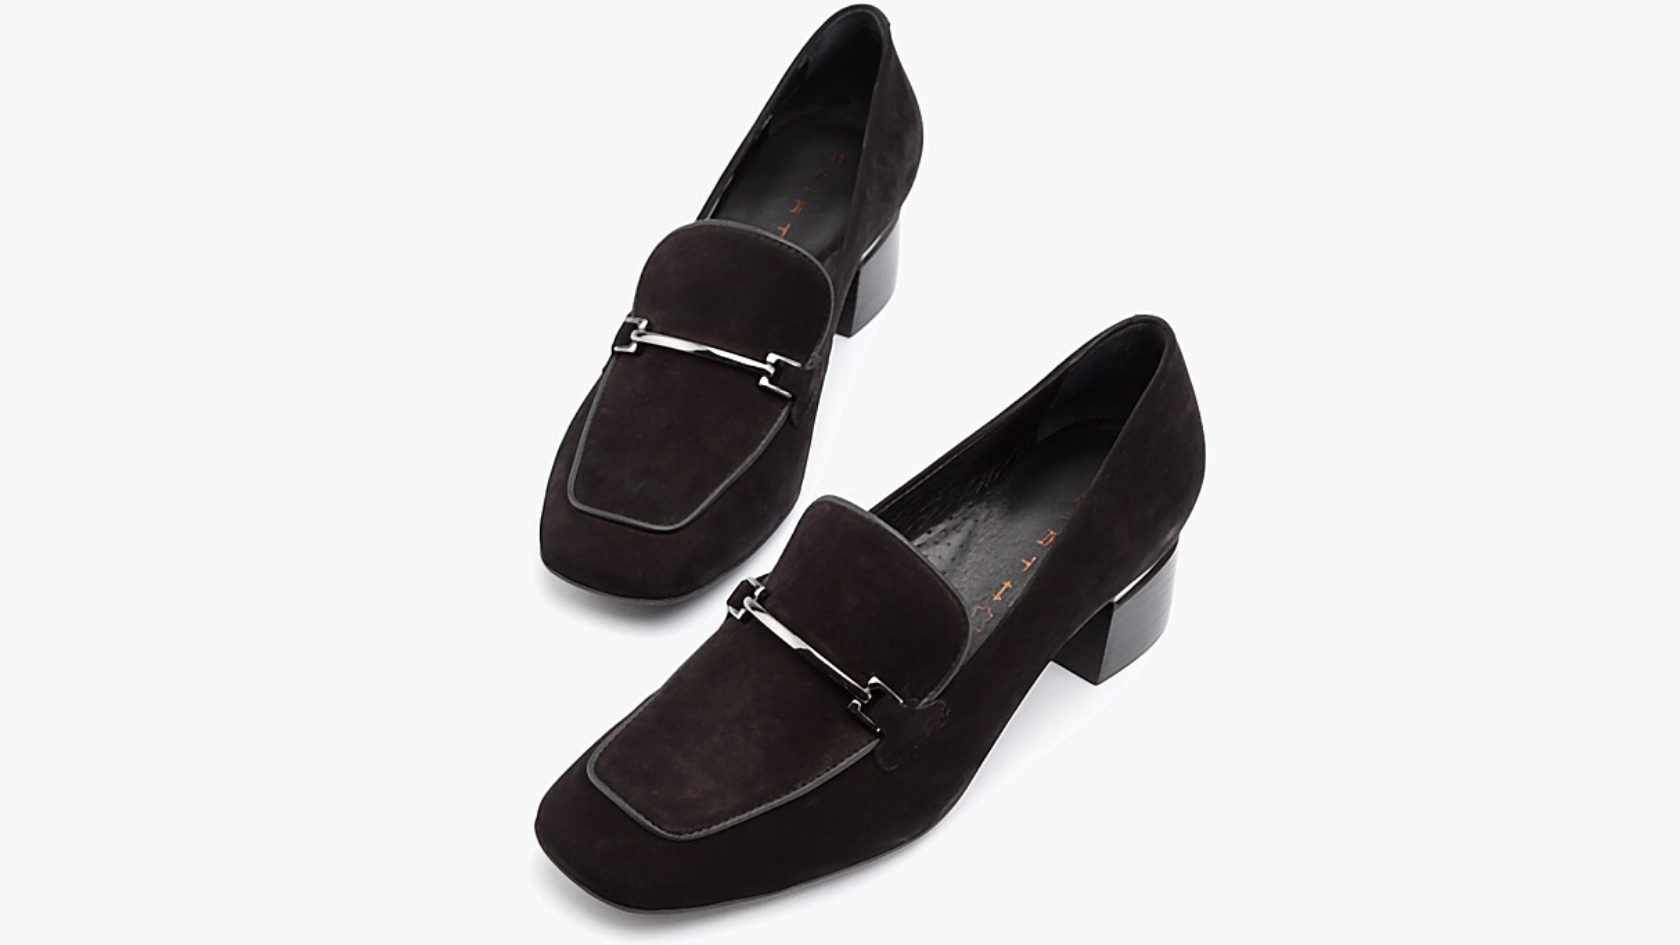 A pair of Wirth mule heels with a black suede upper and metal detailing against a neutral background. 